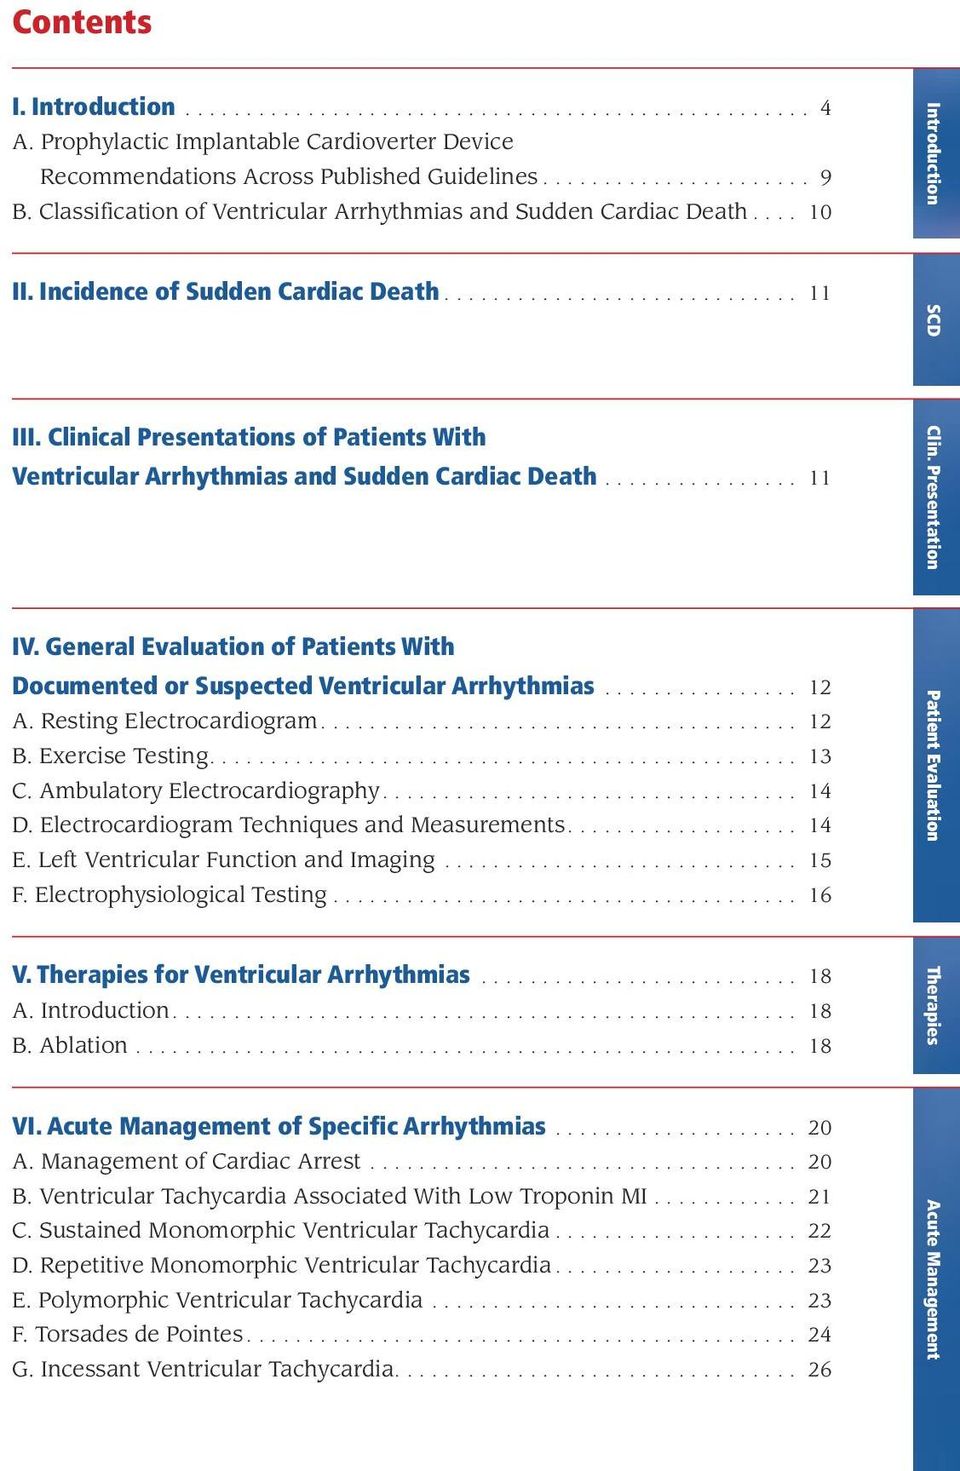 Clinical Presentations of Patients With Ventricular Arrhythmias and Sudden Cardiac Death................ 11 IV. General Evaluation of Patients With Documented or Suspected Ventricular Arrhythmias.